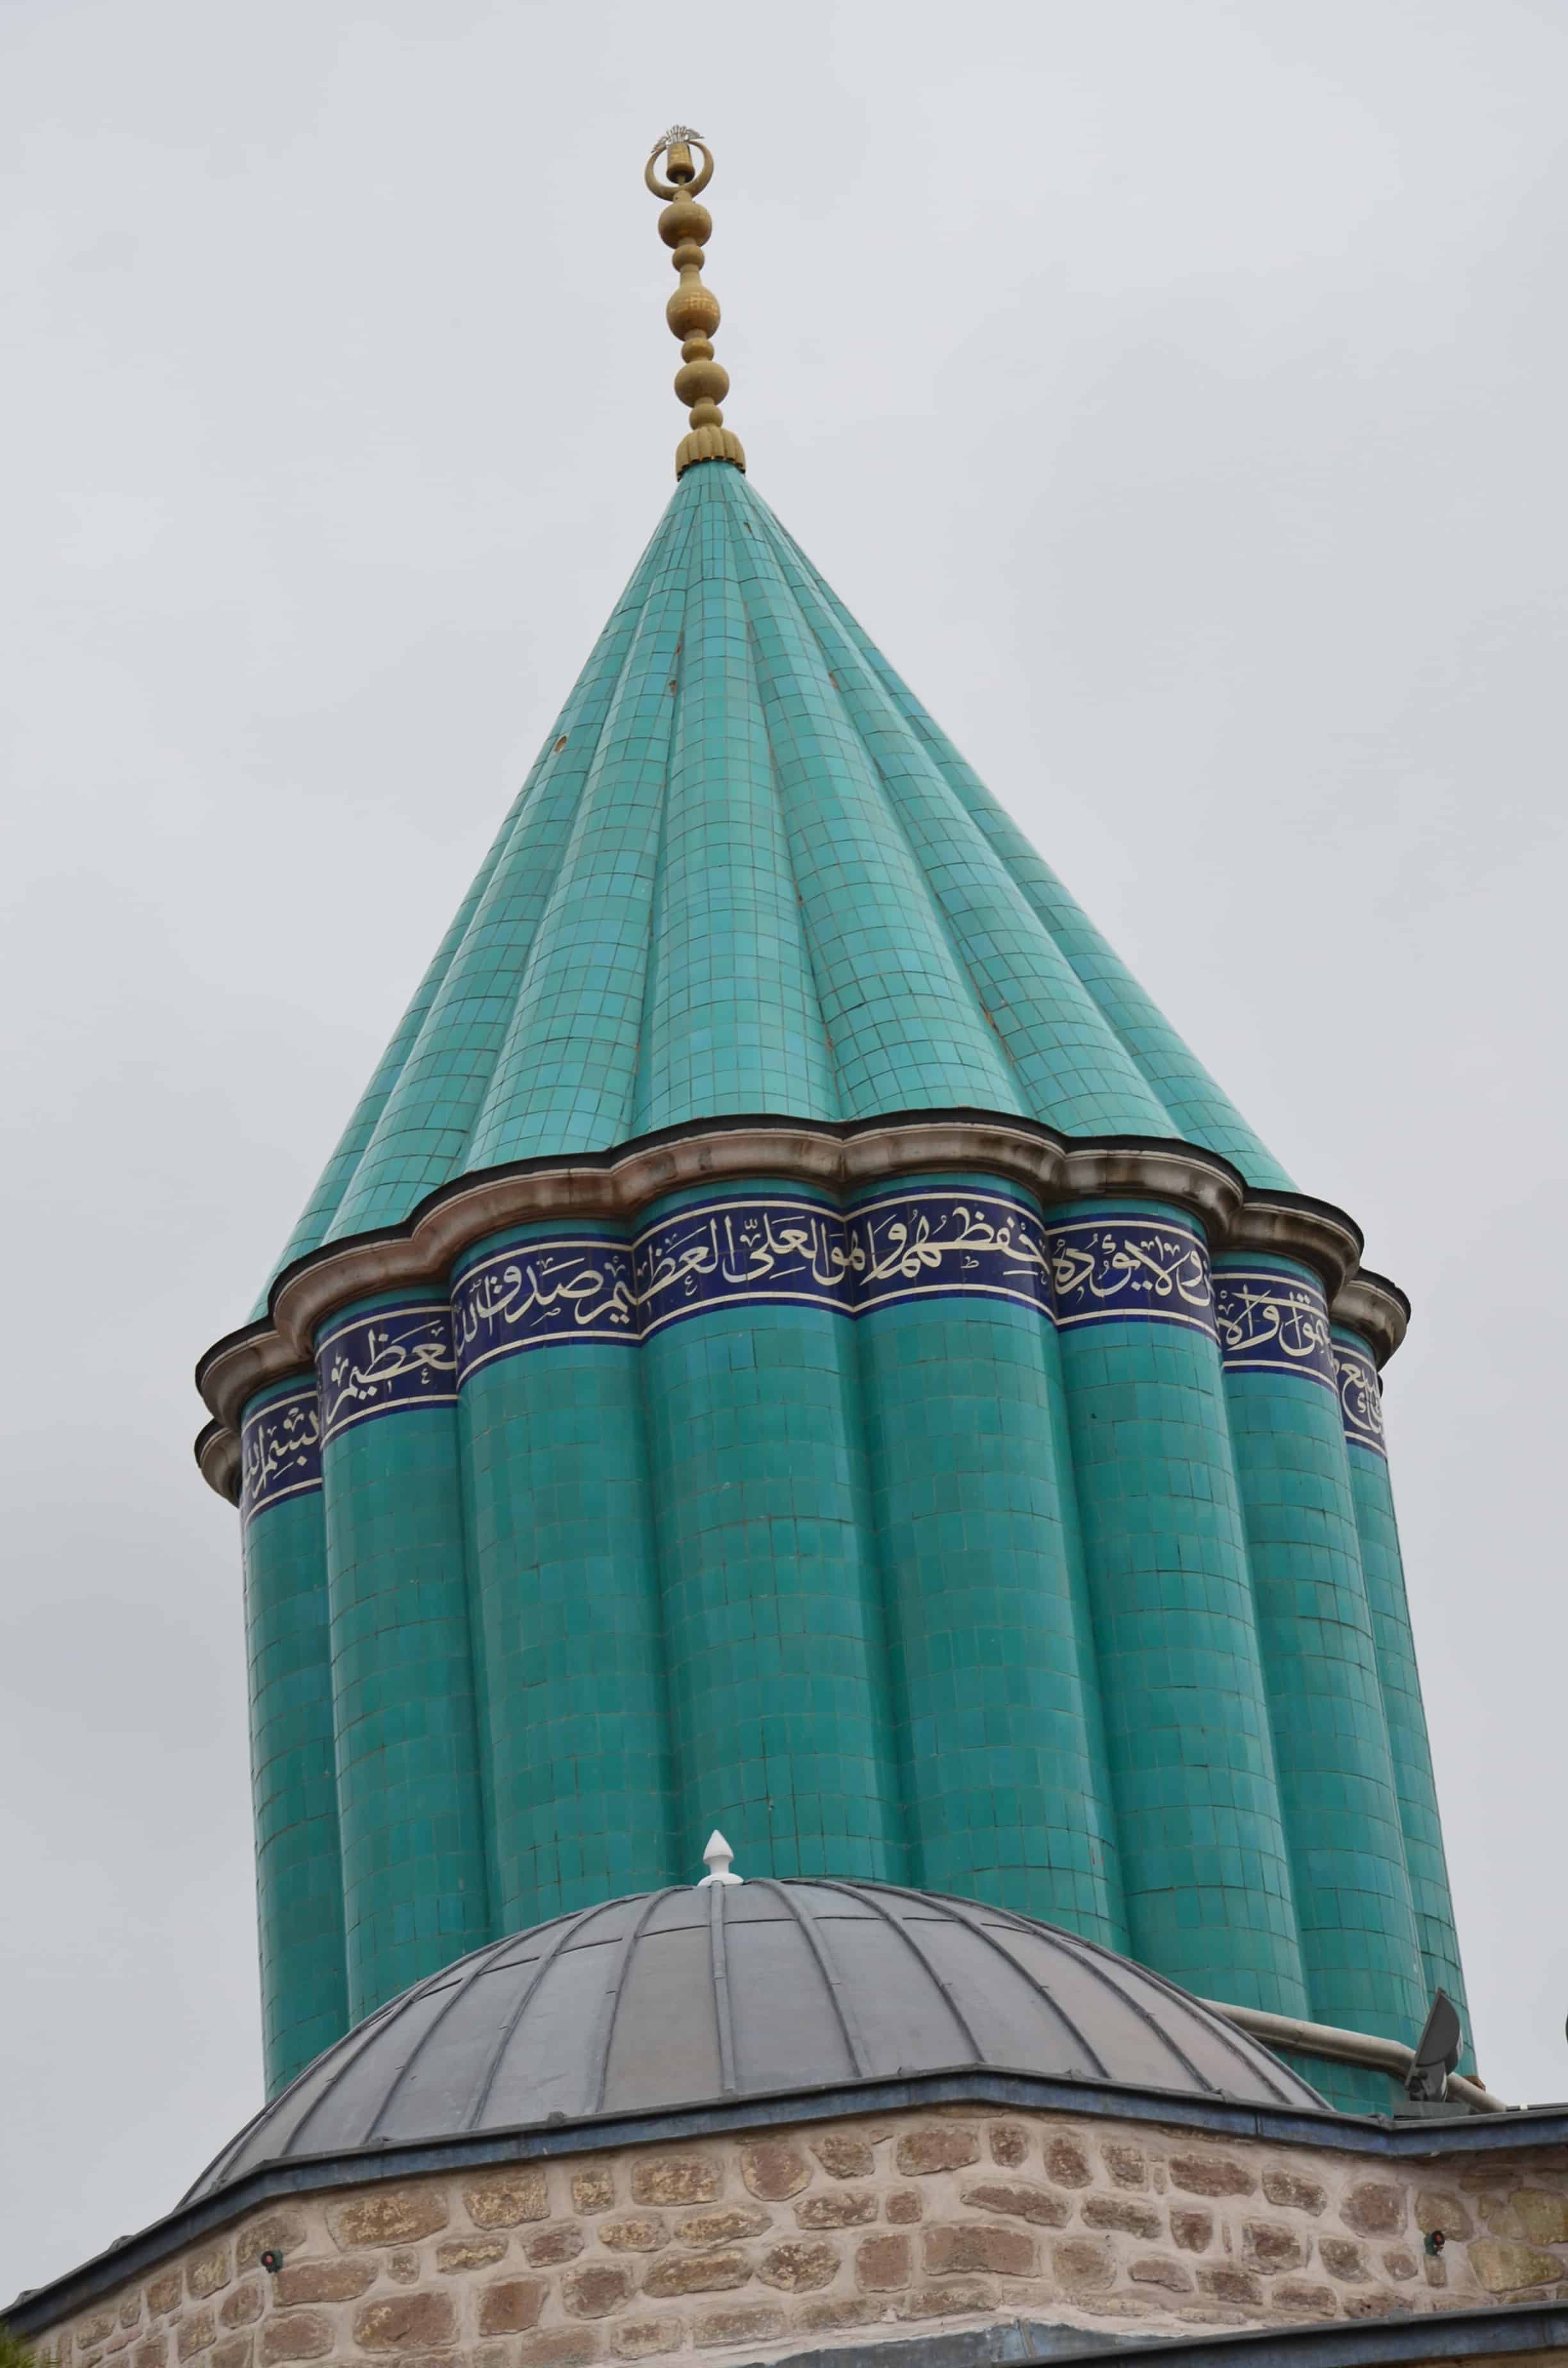 Dome above Rumi's tomb at the Mevlana Museum in Konya, Turkey